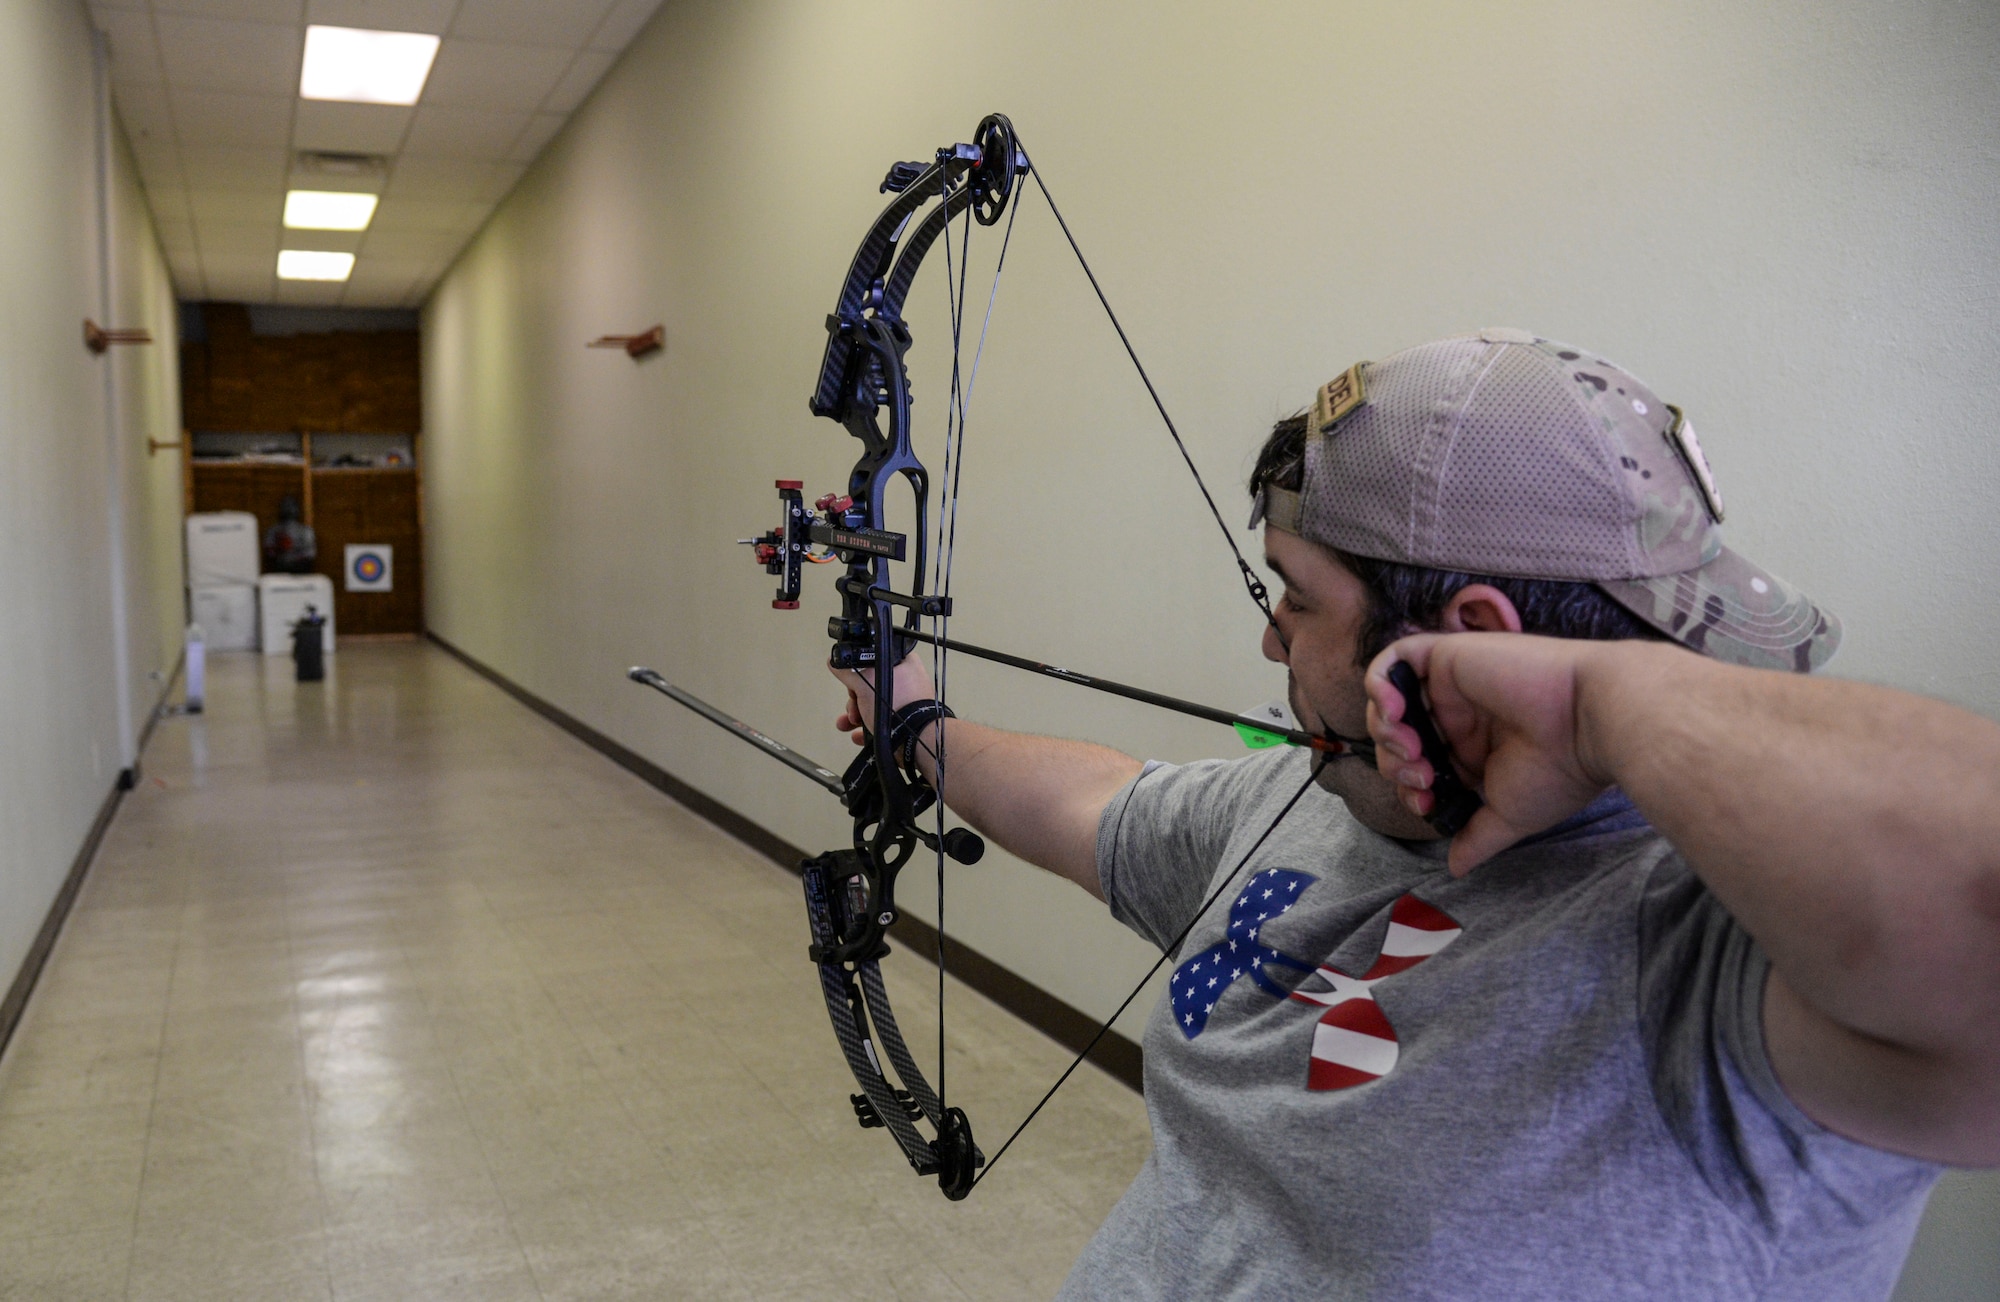 U.S. Air Force Staff Sgt. Seth Pena, a former tactical control air party member now assigned to the 59th Medical Wing's Airman Medical Transition Unit, readies his compound bow to strike a target 25 meters away Sept. 14, 2014 at a local archery facility in San Antonio. Pena is vying for a spot on the Air Force team competing at the 2014 Warrior Games Sept. 28 through Oct. 4, 2014, in Colorado Springs, Colorado. (U.S. Air Force photo/Senior Airman Michael Ellis)